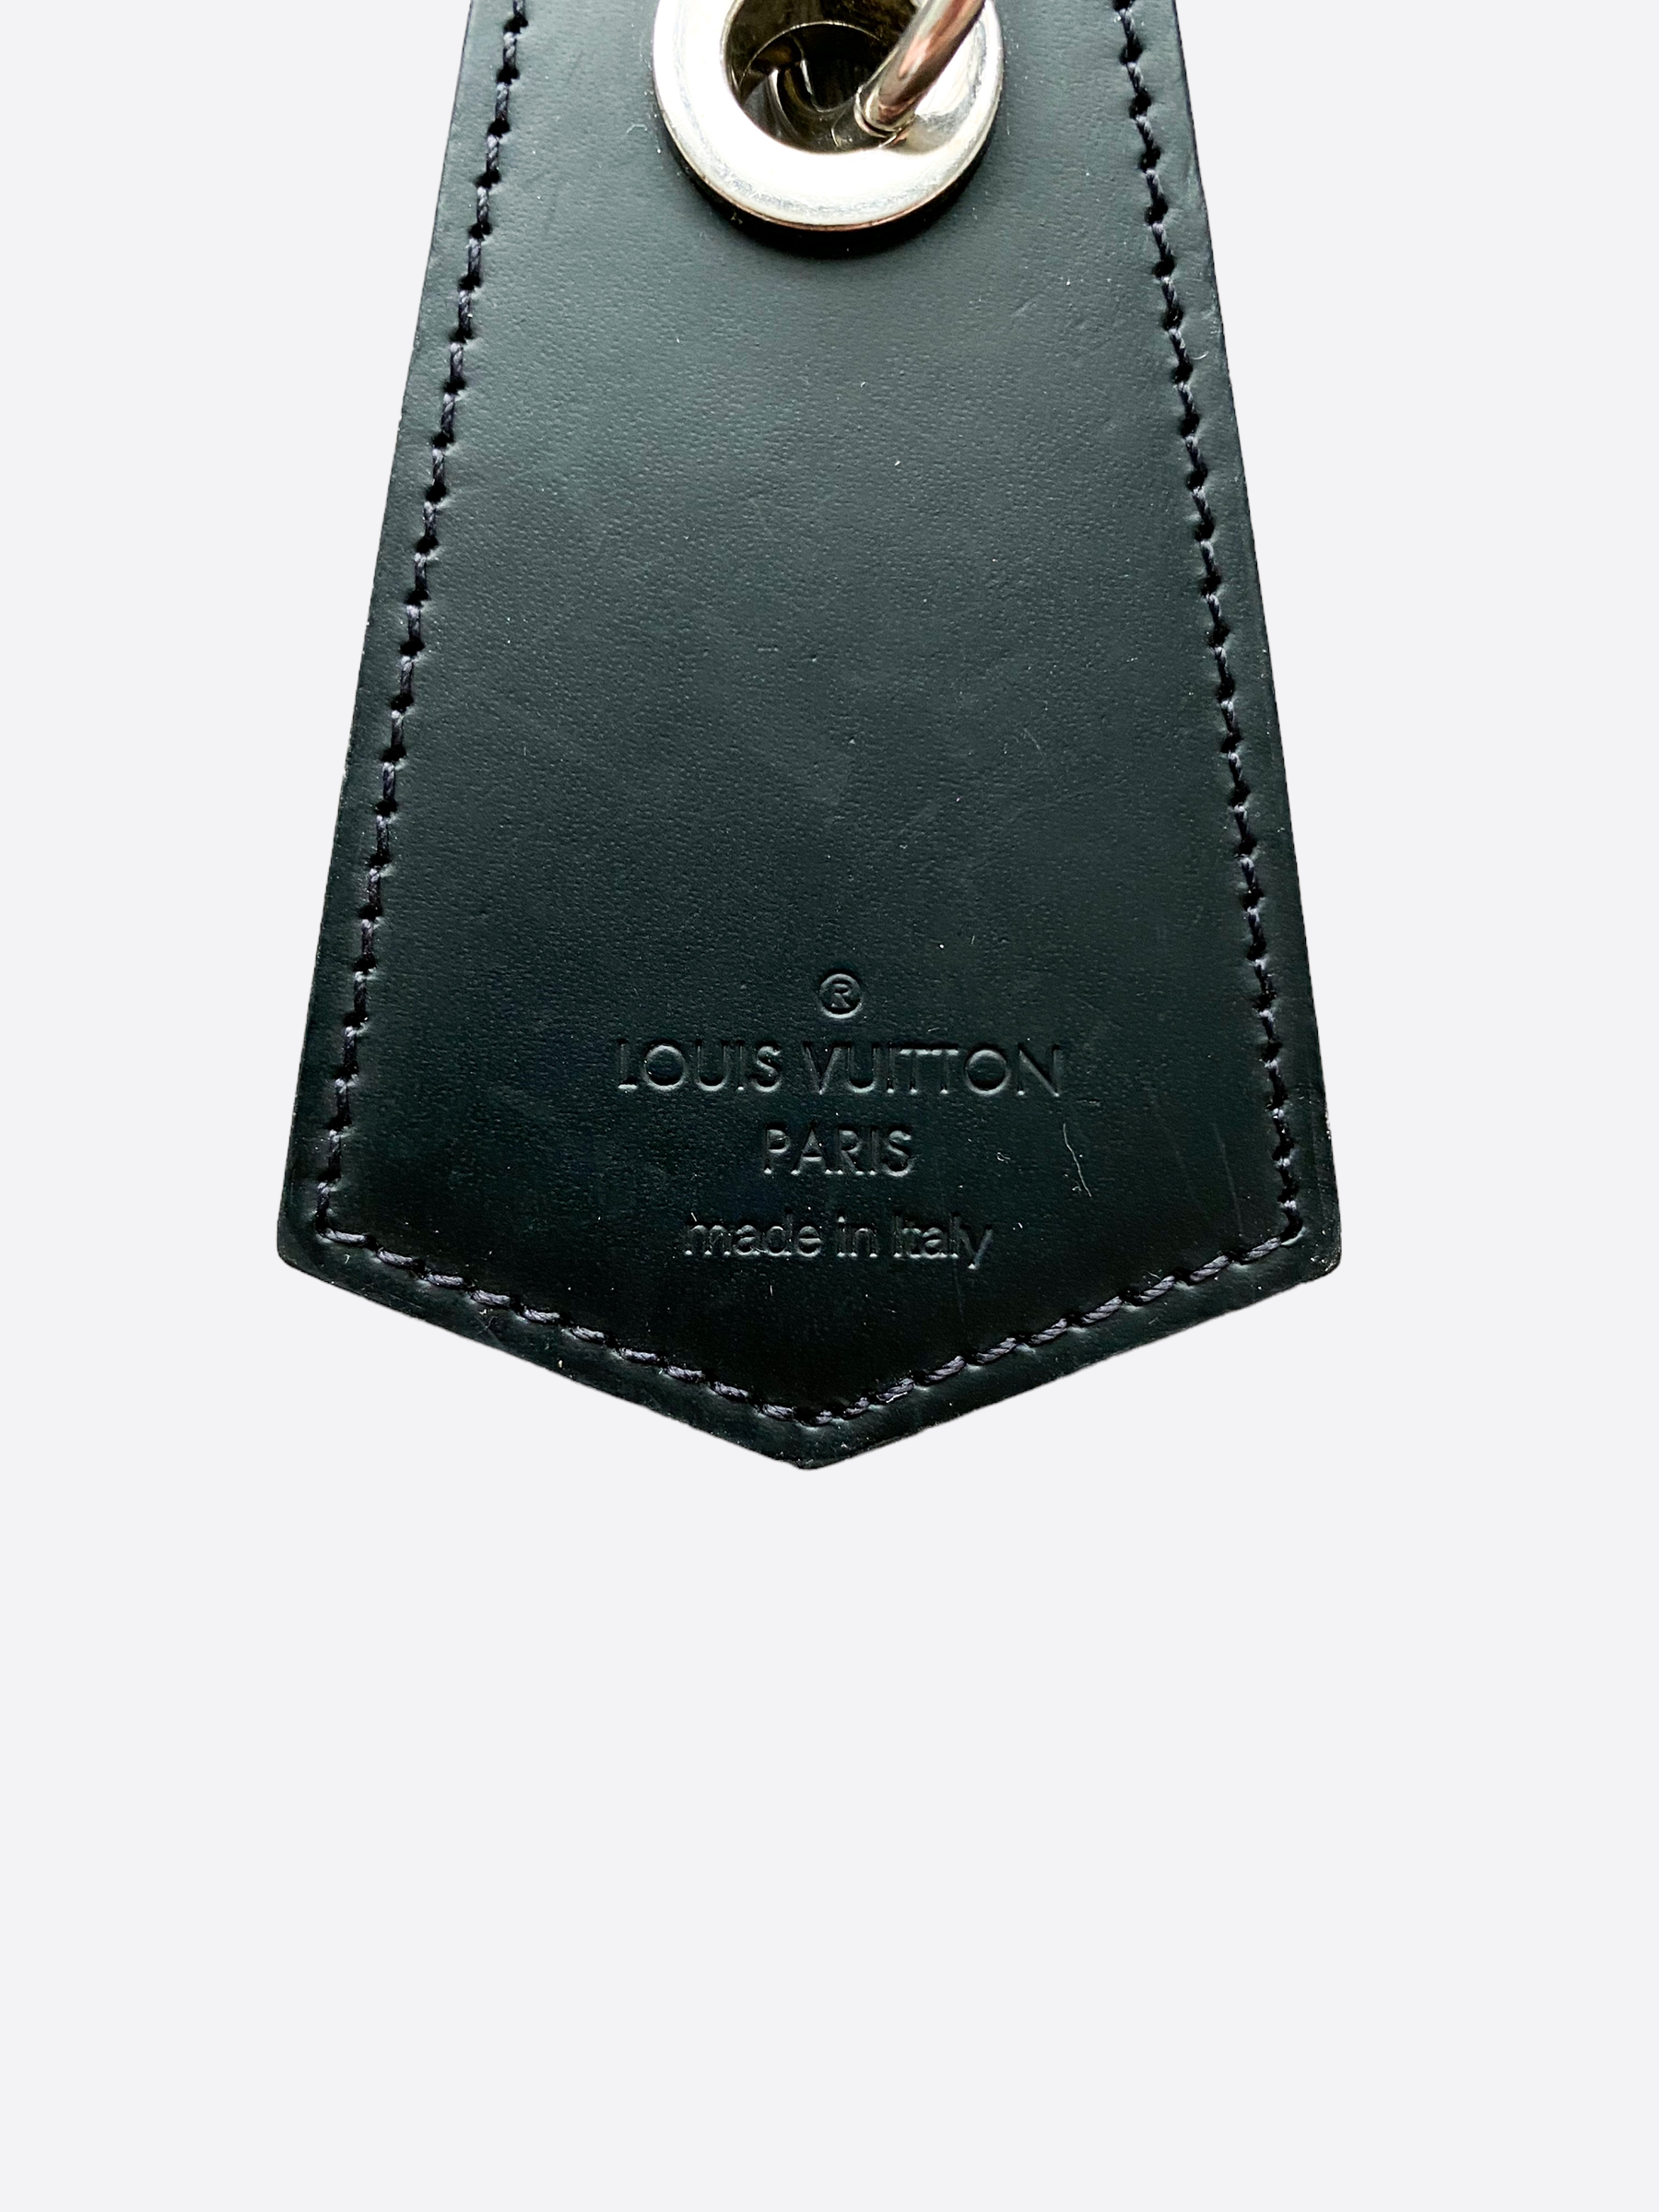 Key Pouch Monogram Eclipse - Men - Small Leather Goods